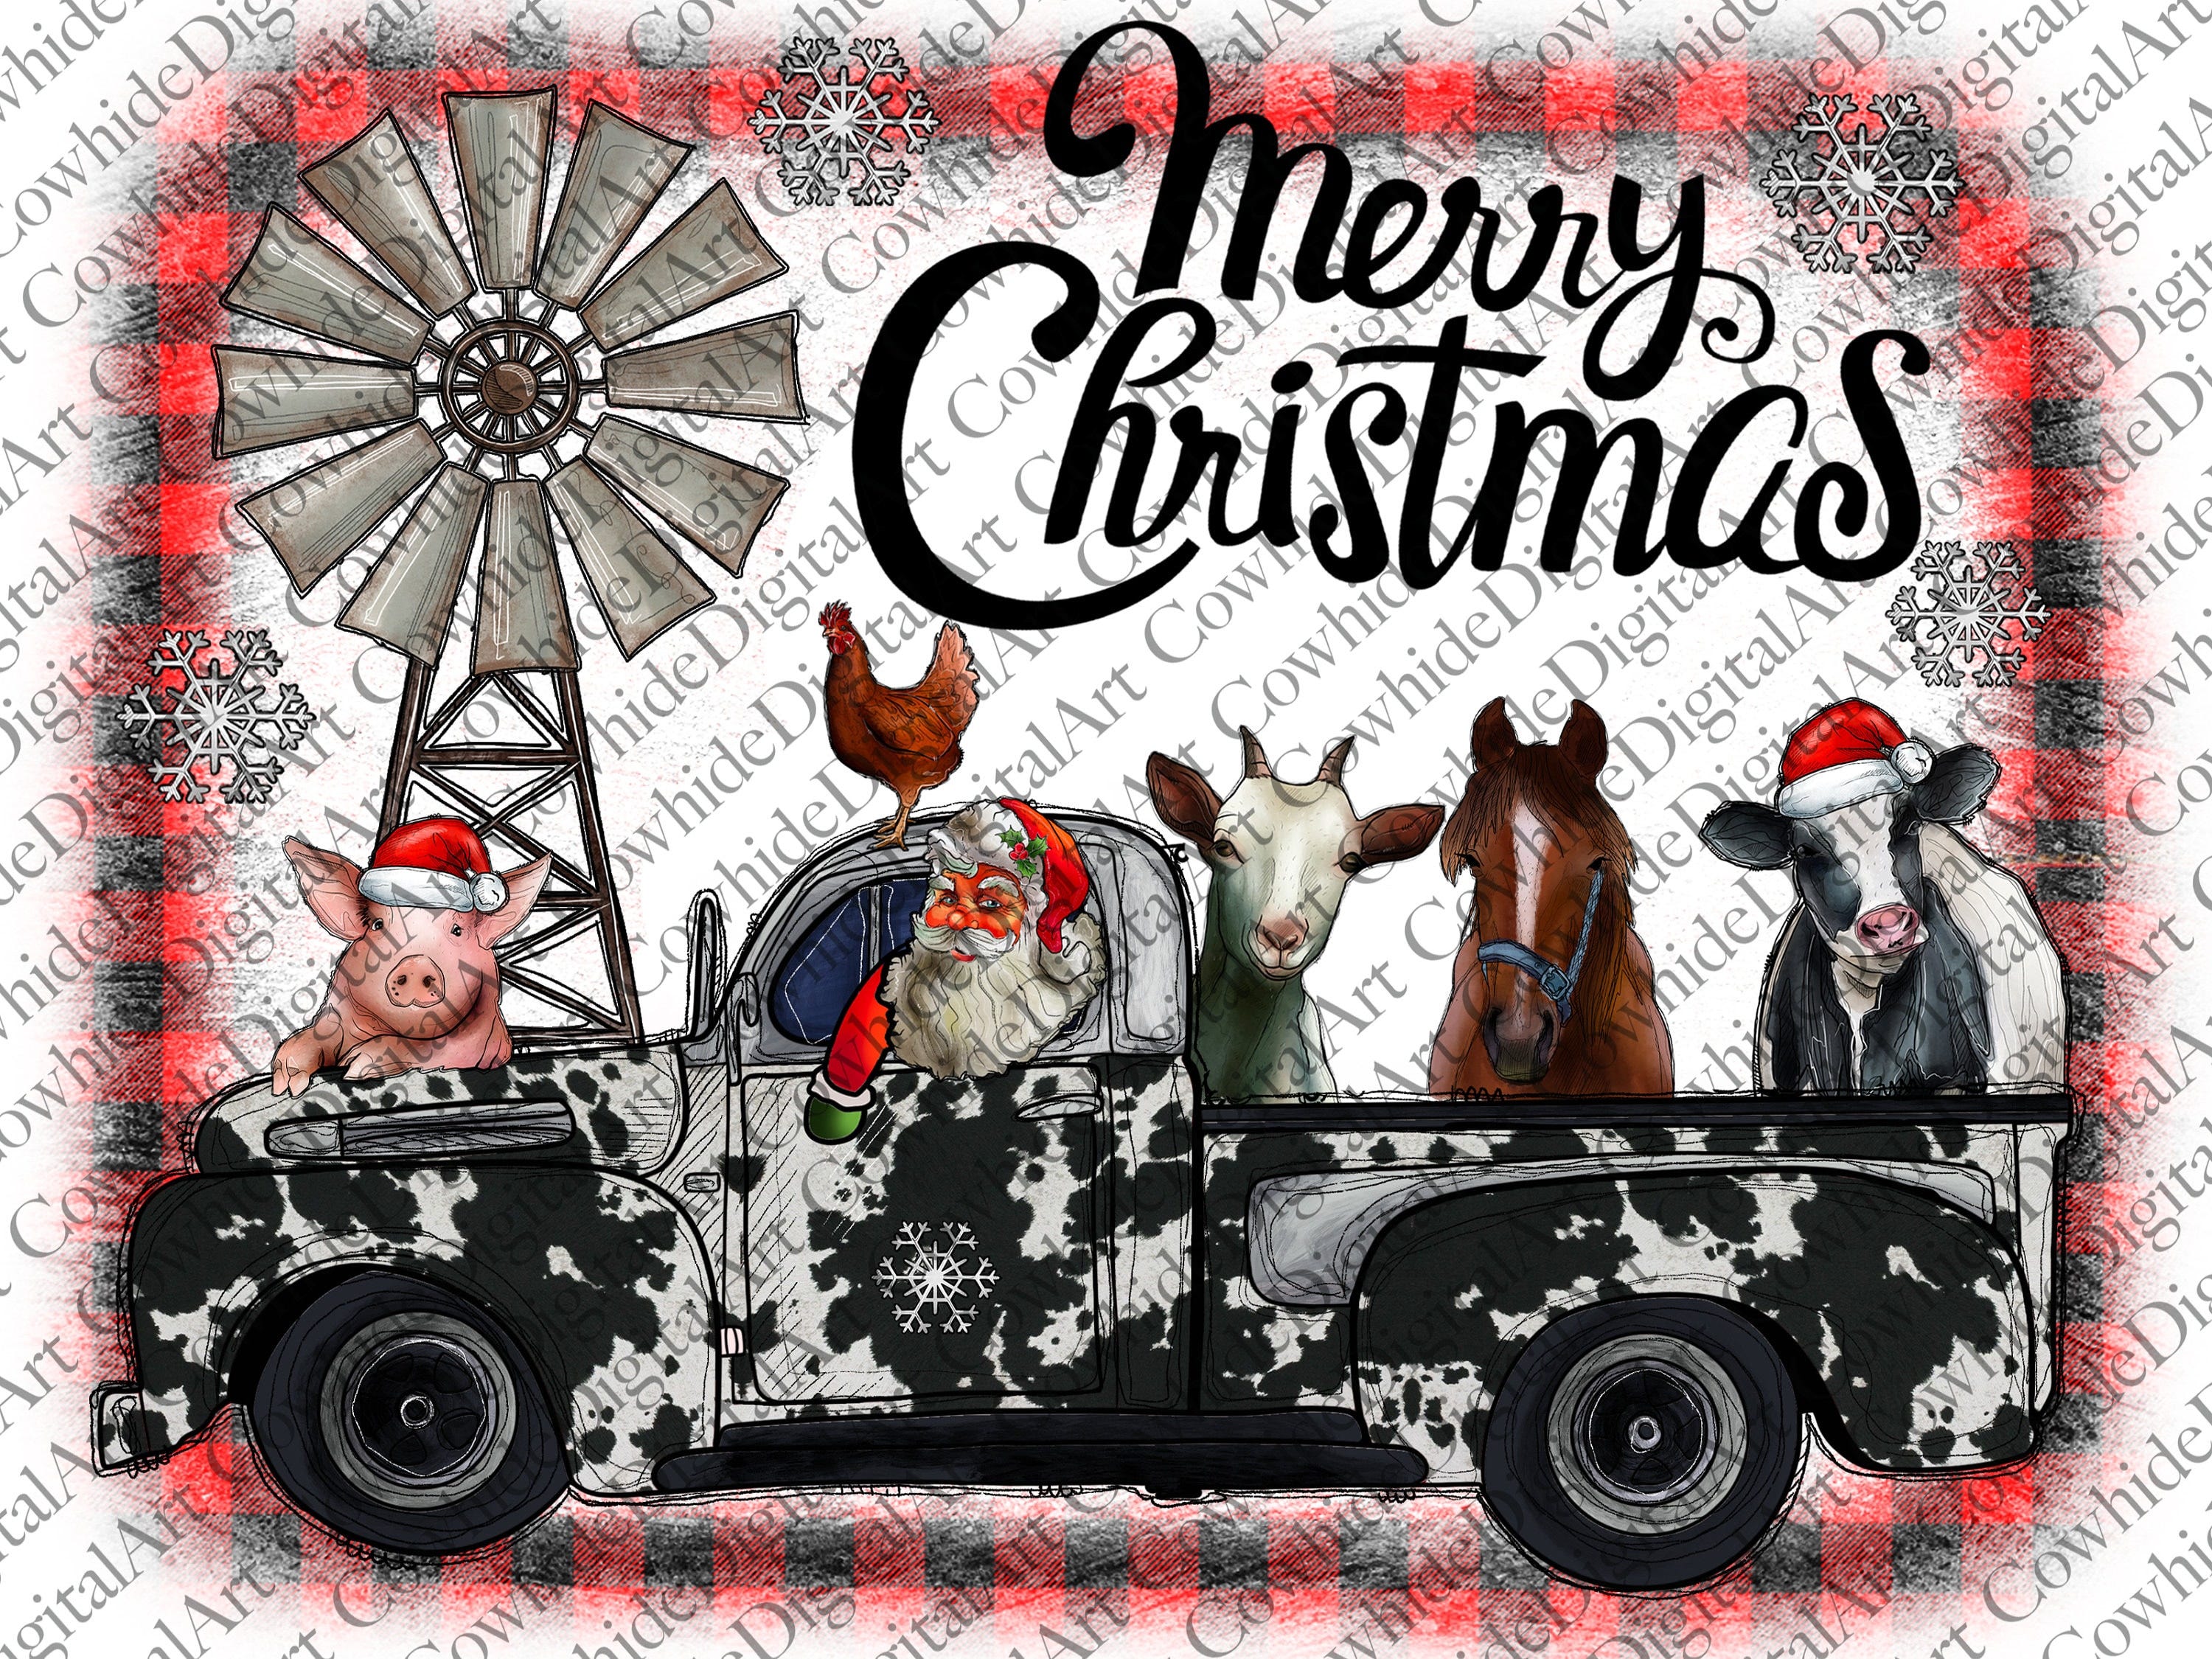 Christmas Farm Animals Truck png, Christmas Animals, Digital Download, Png, Merry Christmas, Christmas Png,Sublimation Designs Downloads